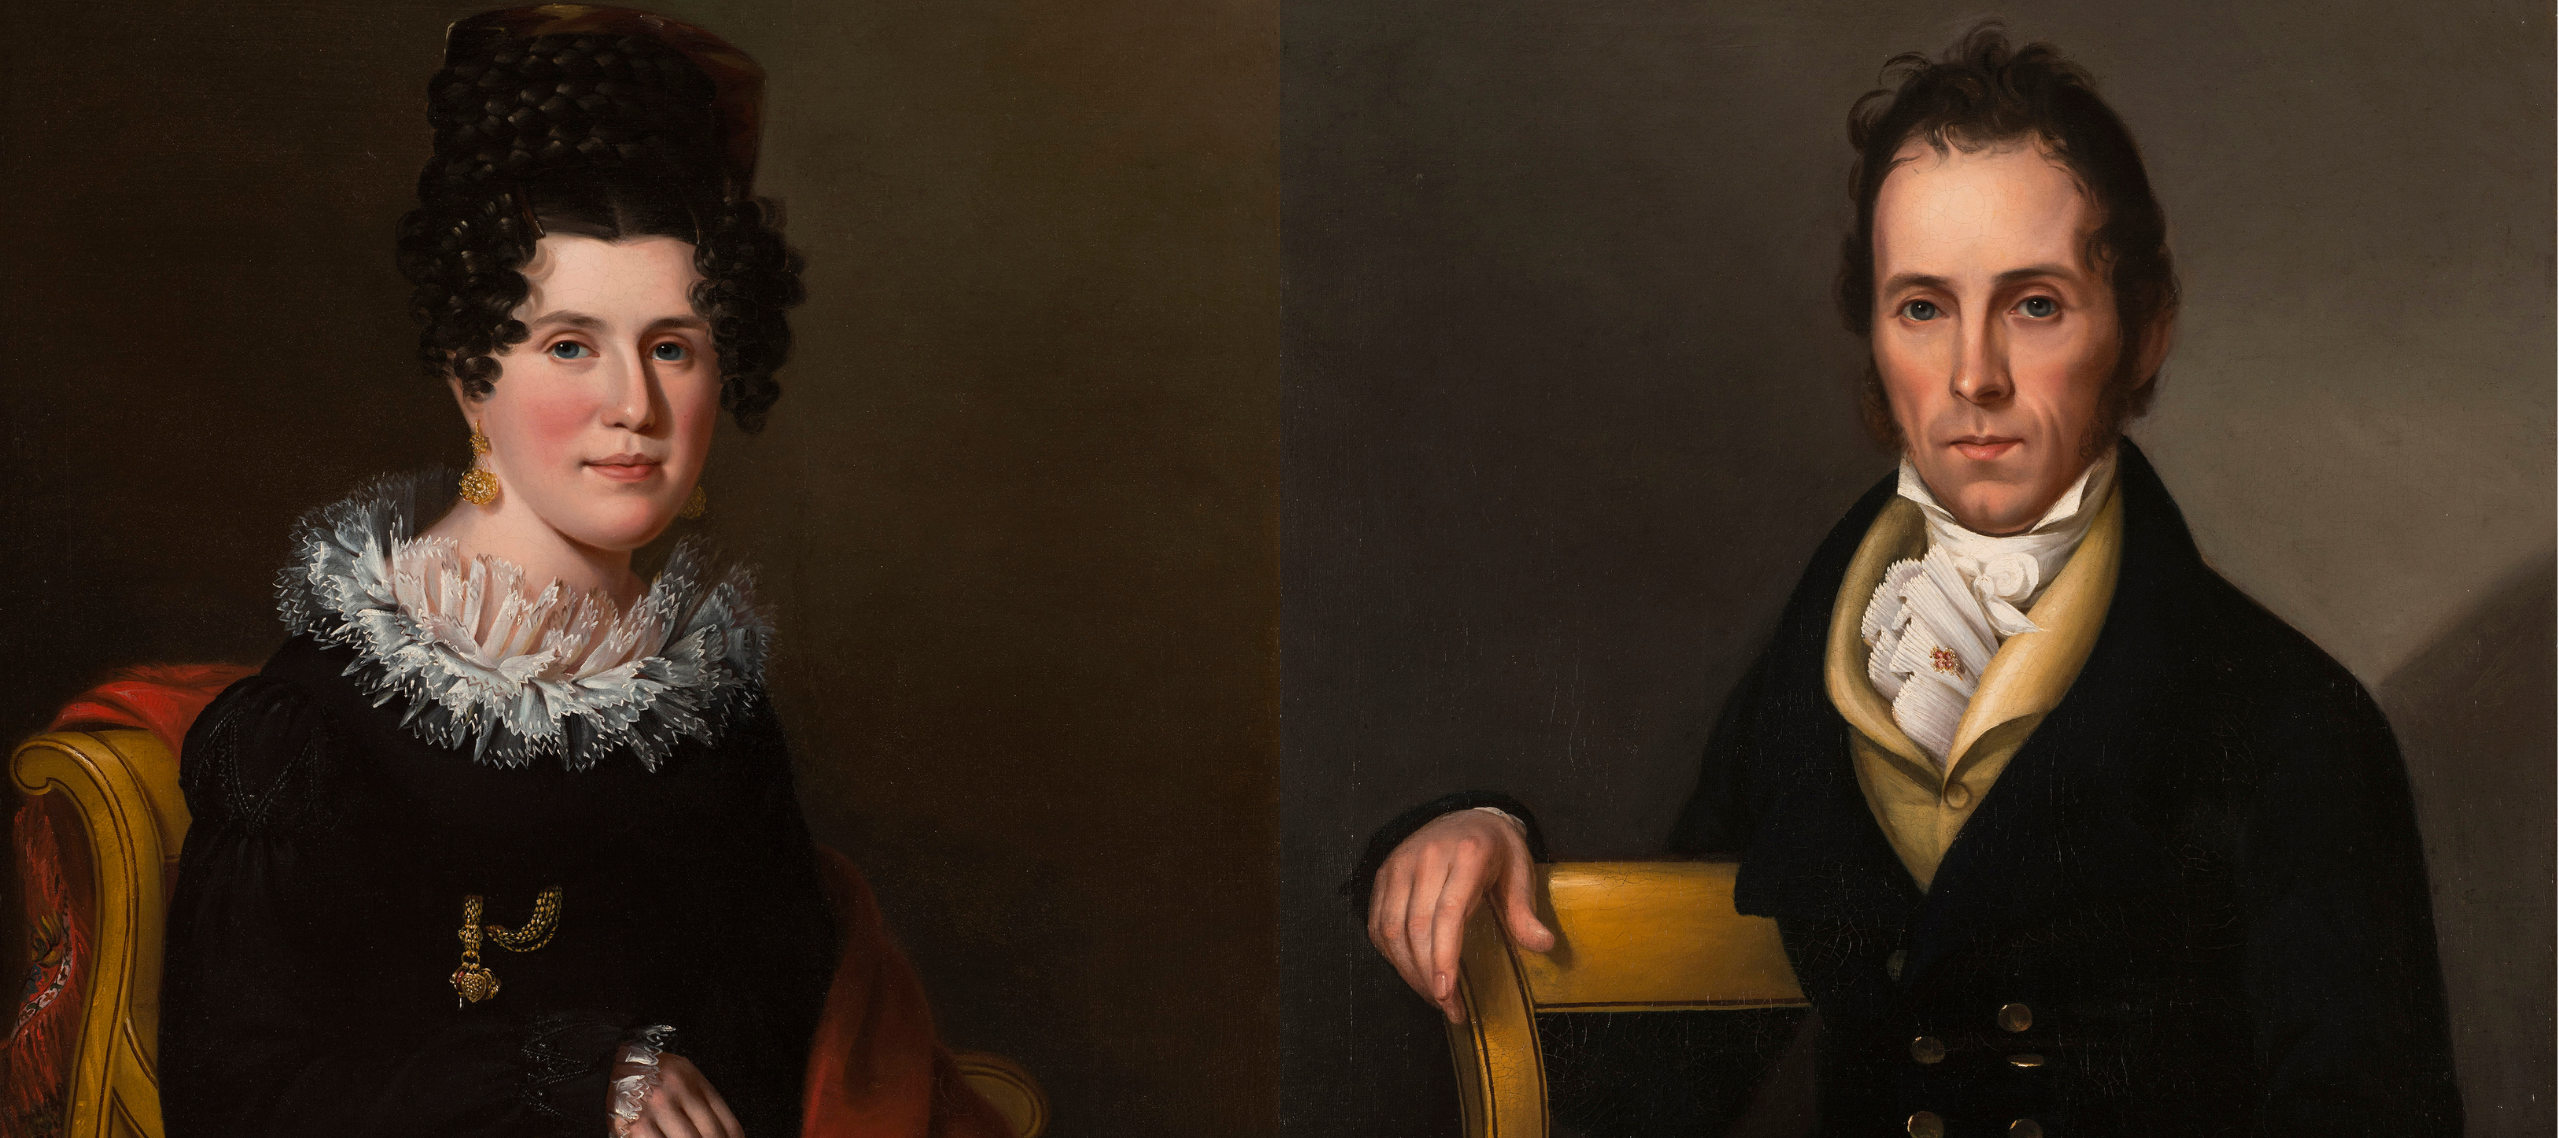 Side-by-side portraits of a light-skinned couple with dark hair sitting in formal postures. Gazing outward, they wear dark clothing with light accents and the woman wears a gold earring and pin. They both hold objects: the woman a brocaded red cloth and the man a book.